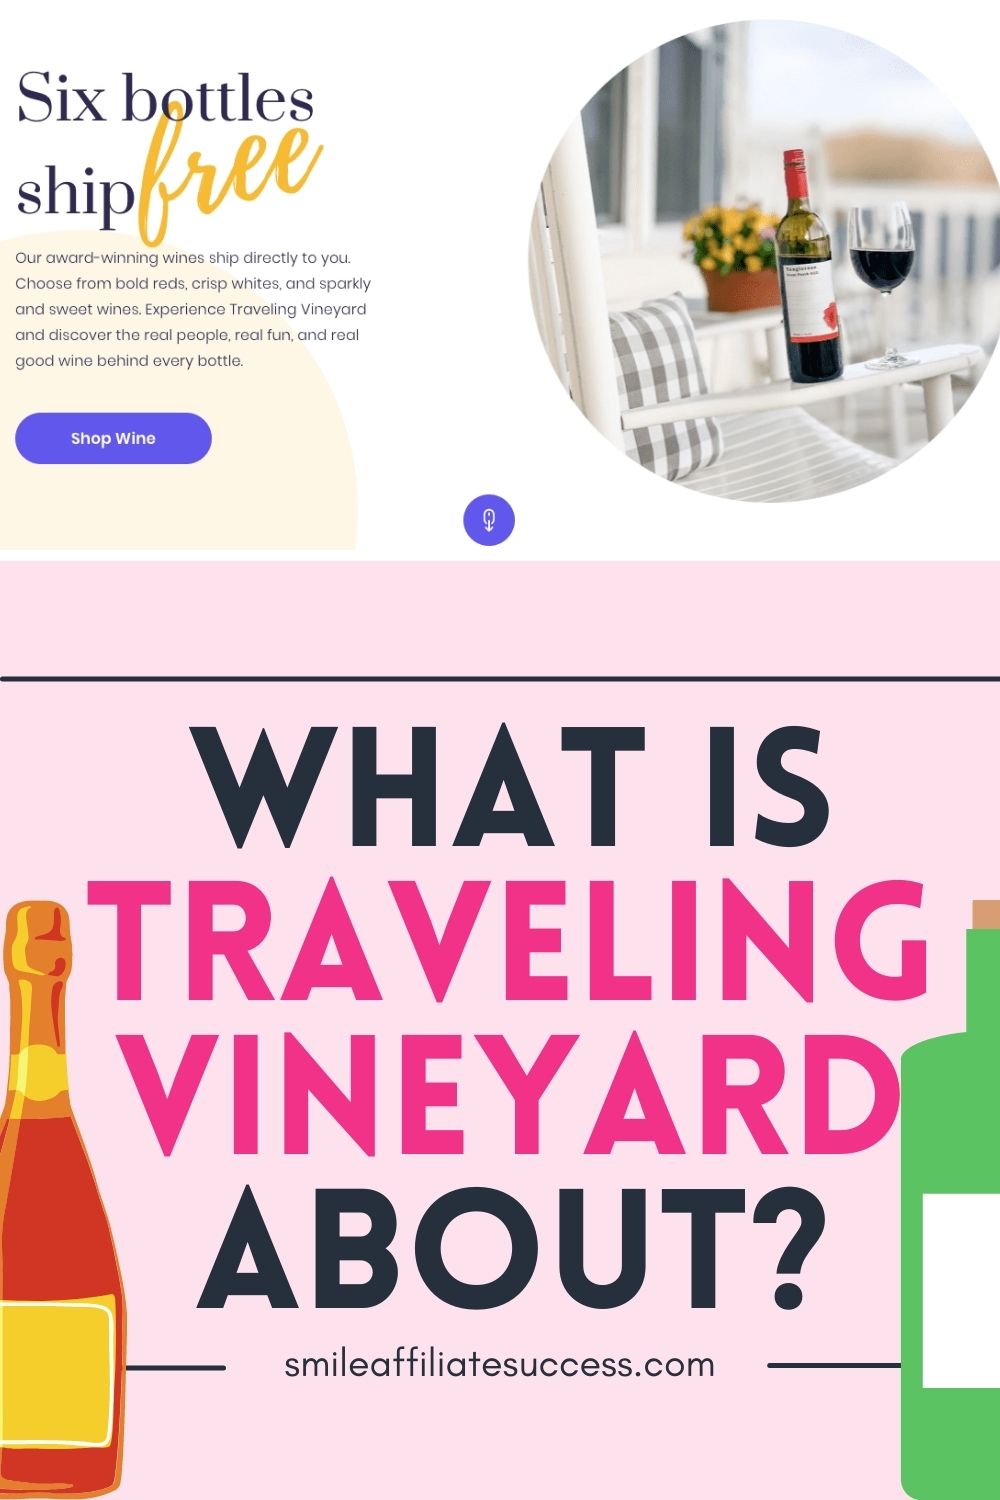 What Is Traveling Vineyard About?